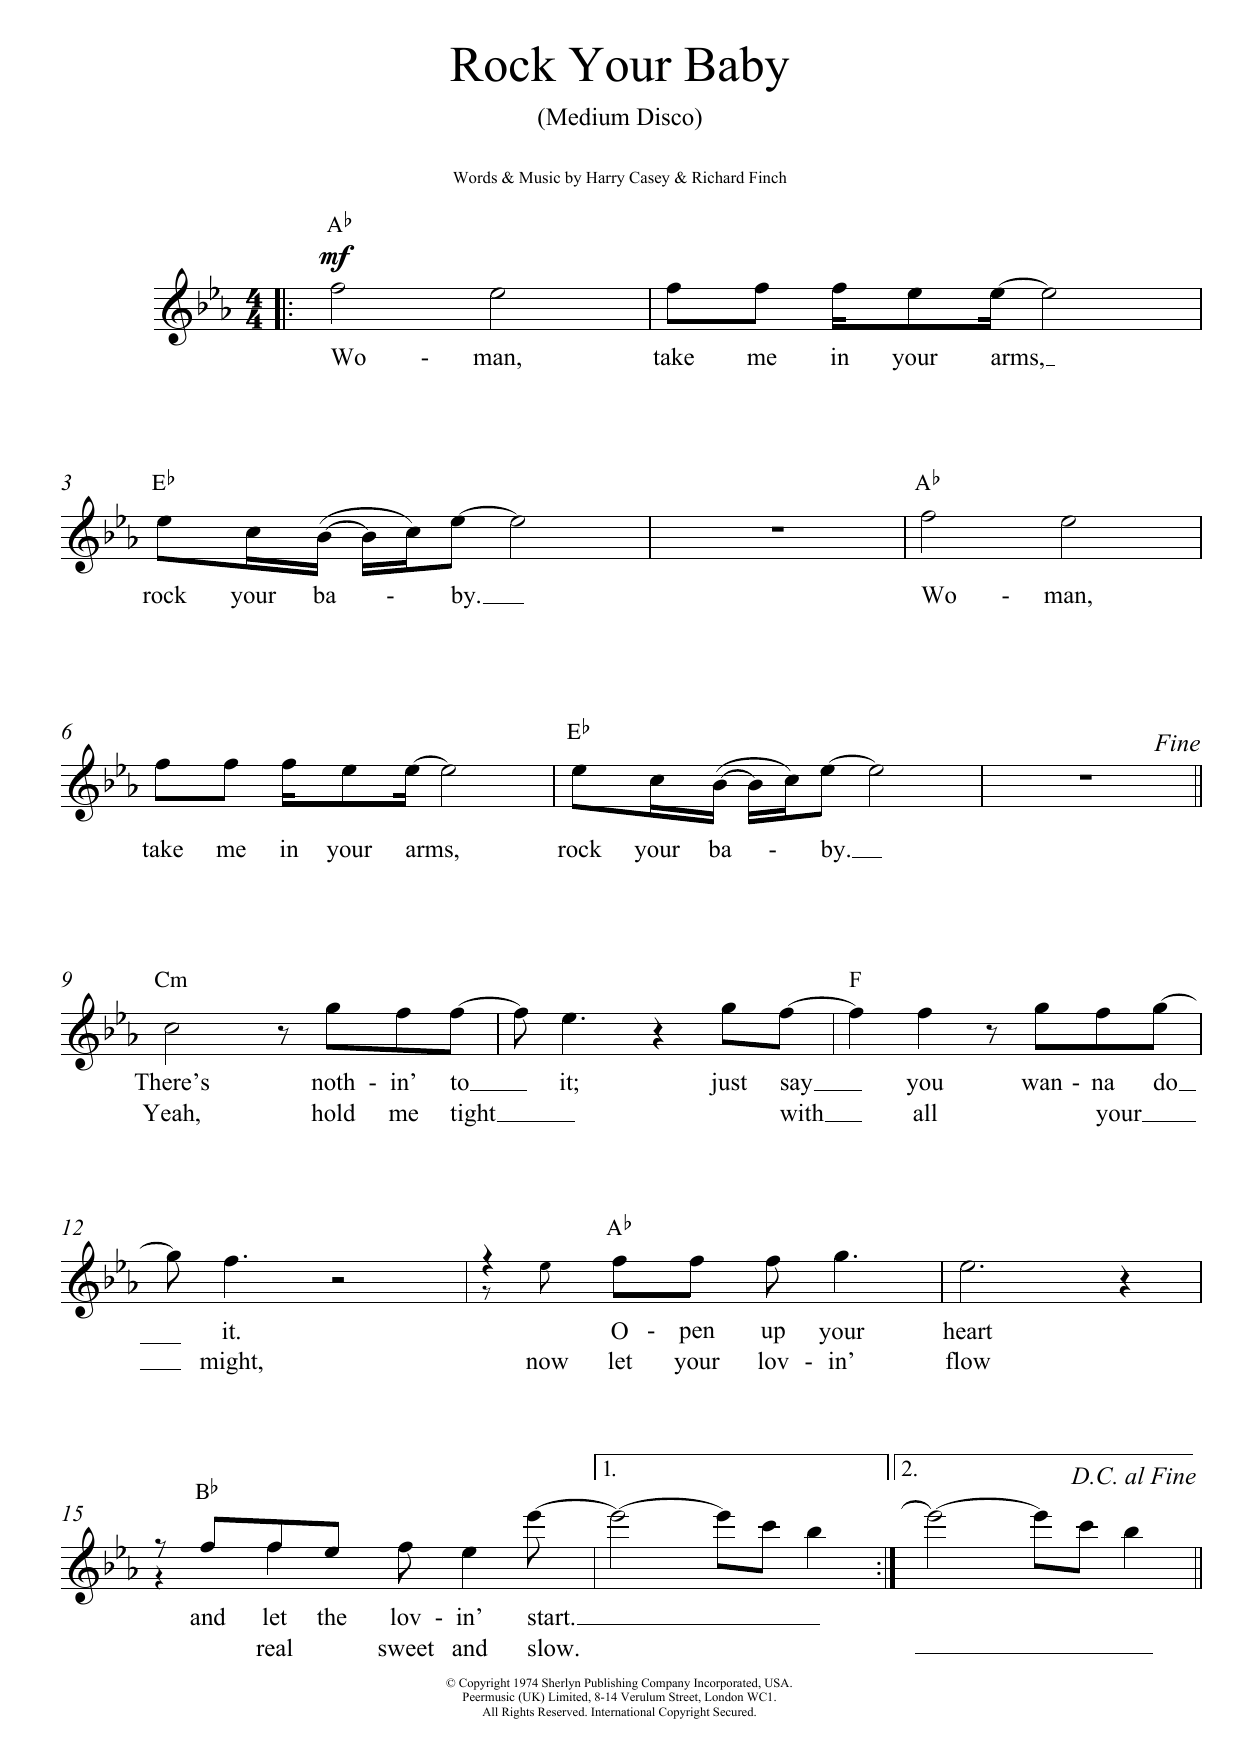 Harry Casey And Richard Finch Rock Your Baby sheet music notes printable PDF score